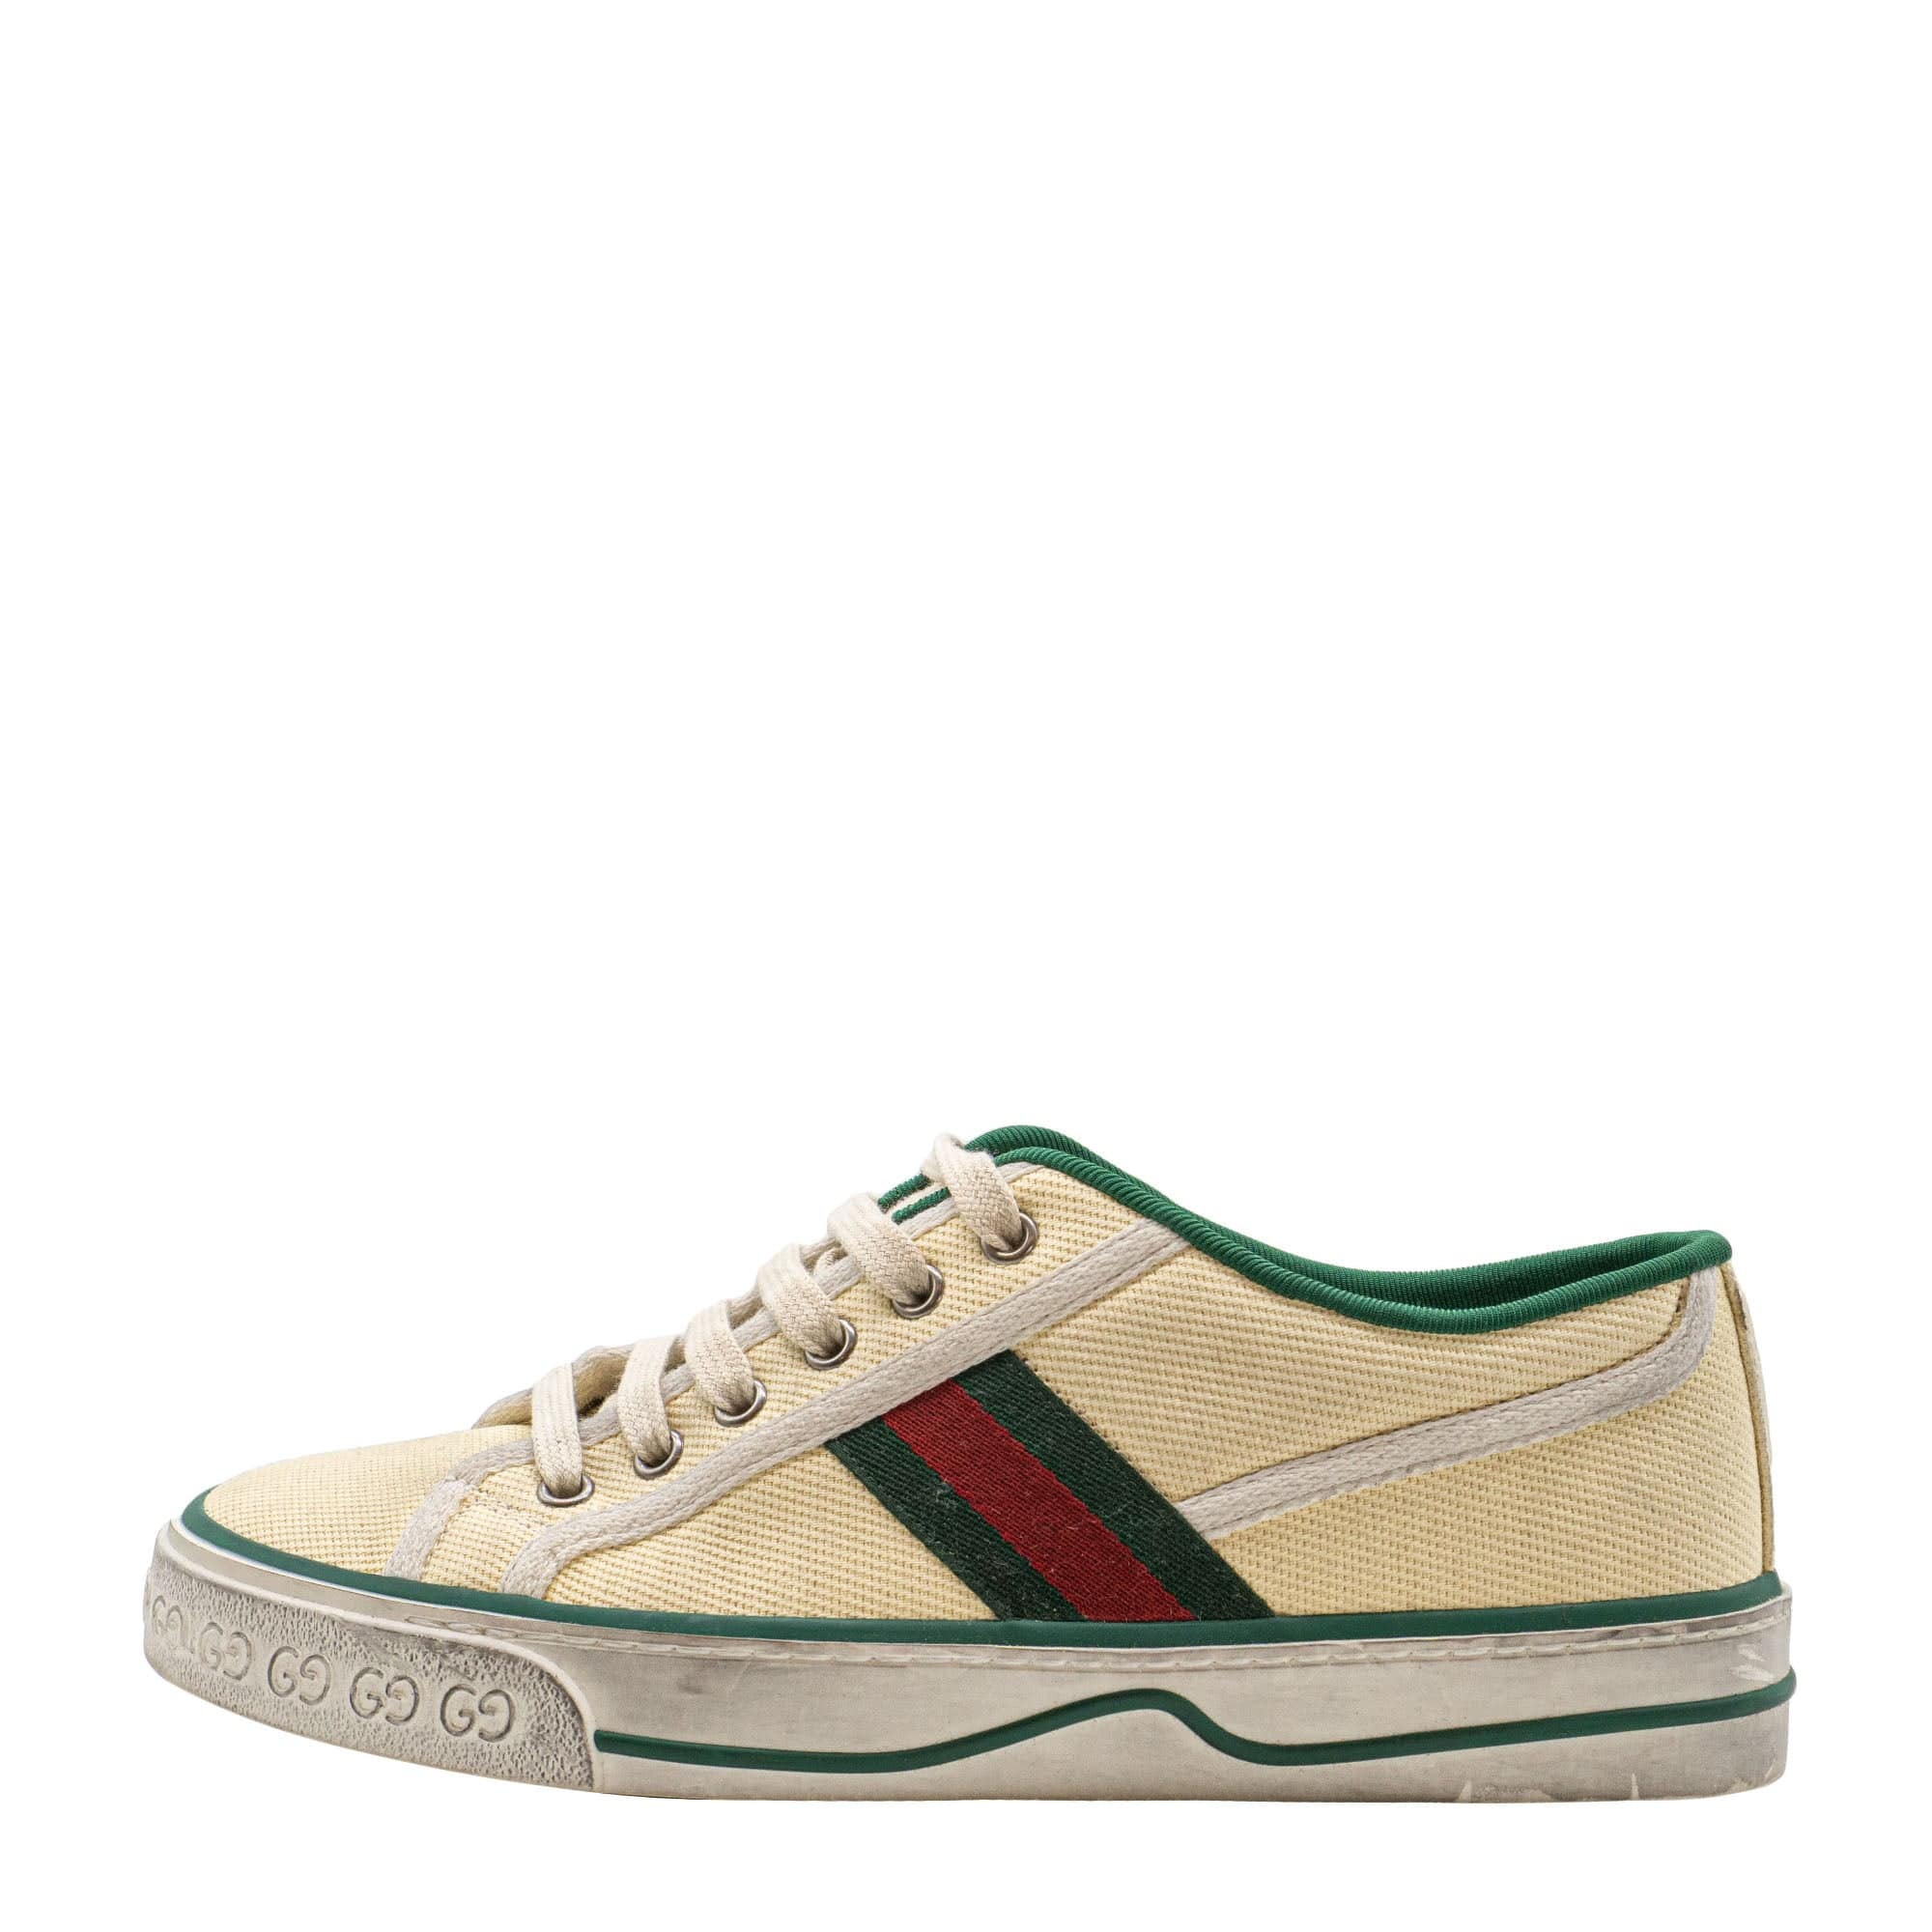 Gucci Gucci Tennis 1977 Sneakers 6 SYCH046